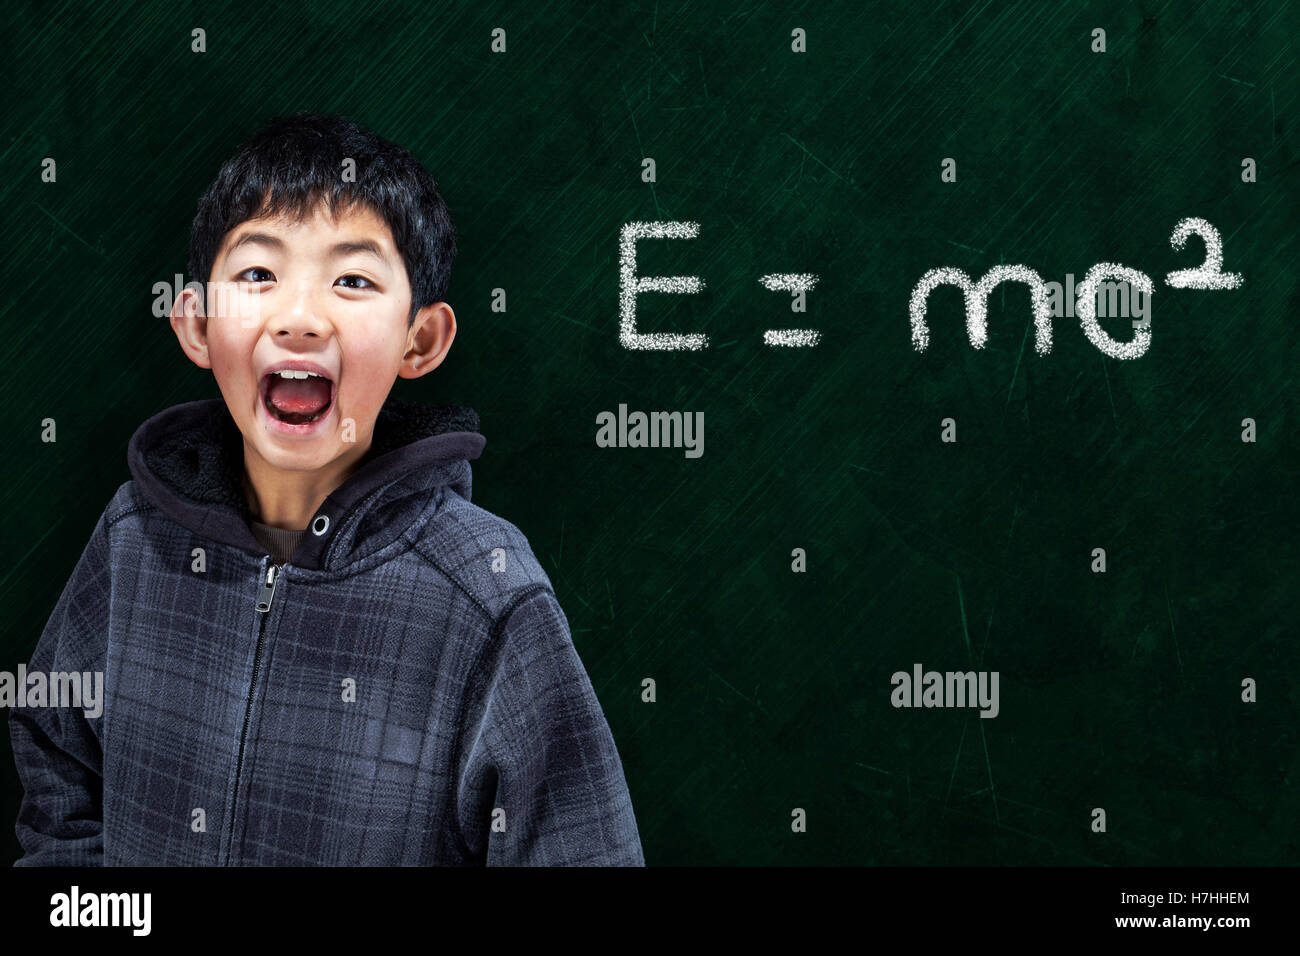 Smart Asian boy with in classroom setting with Math equation on chalkboard background and copy space Stock Photo